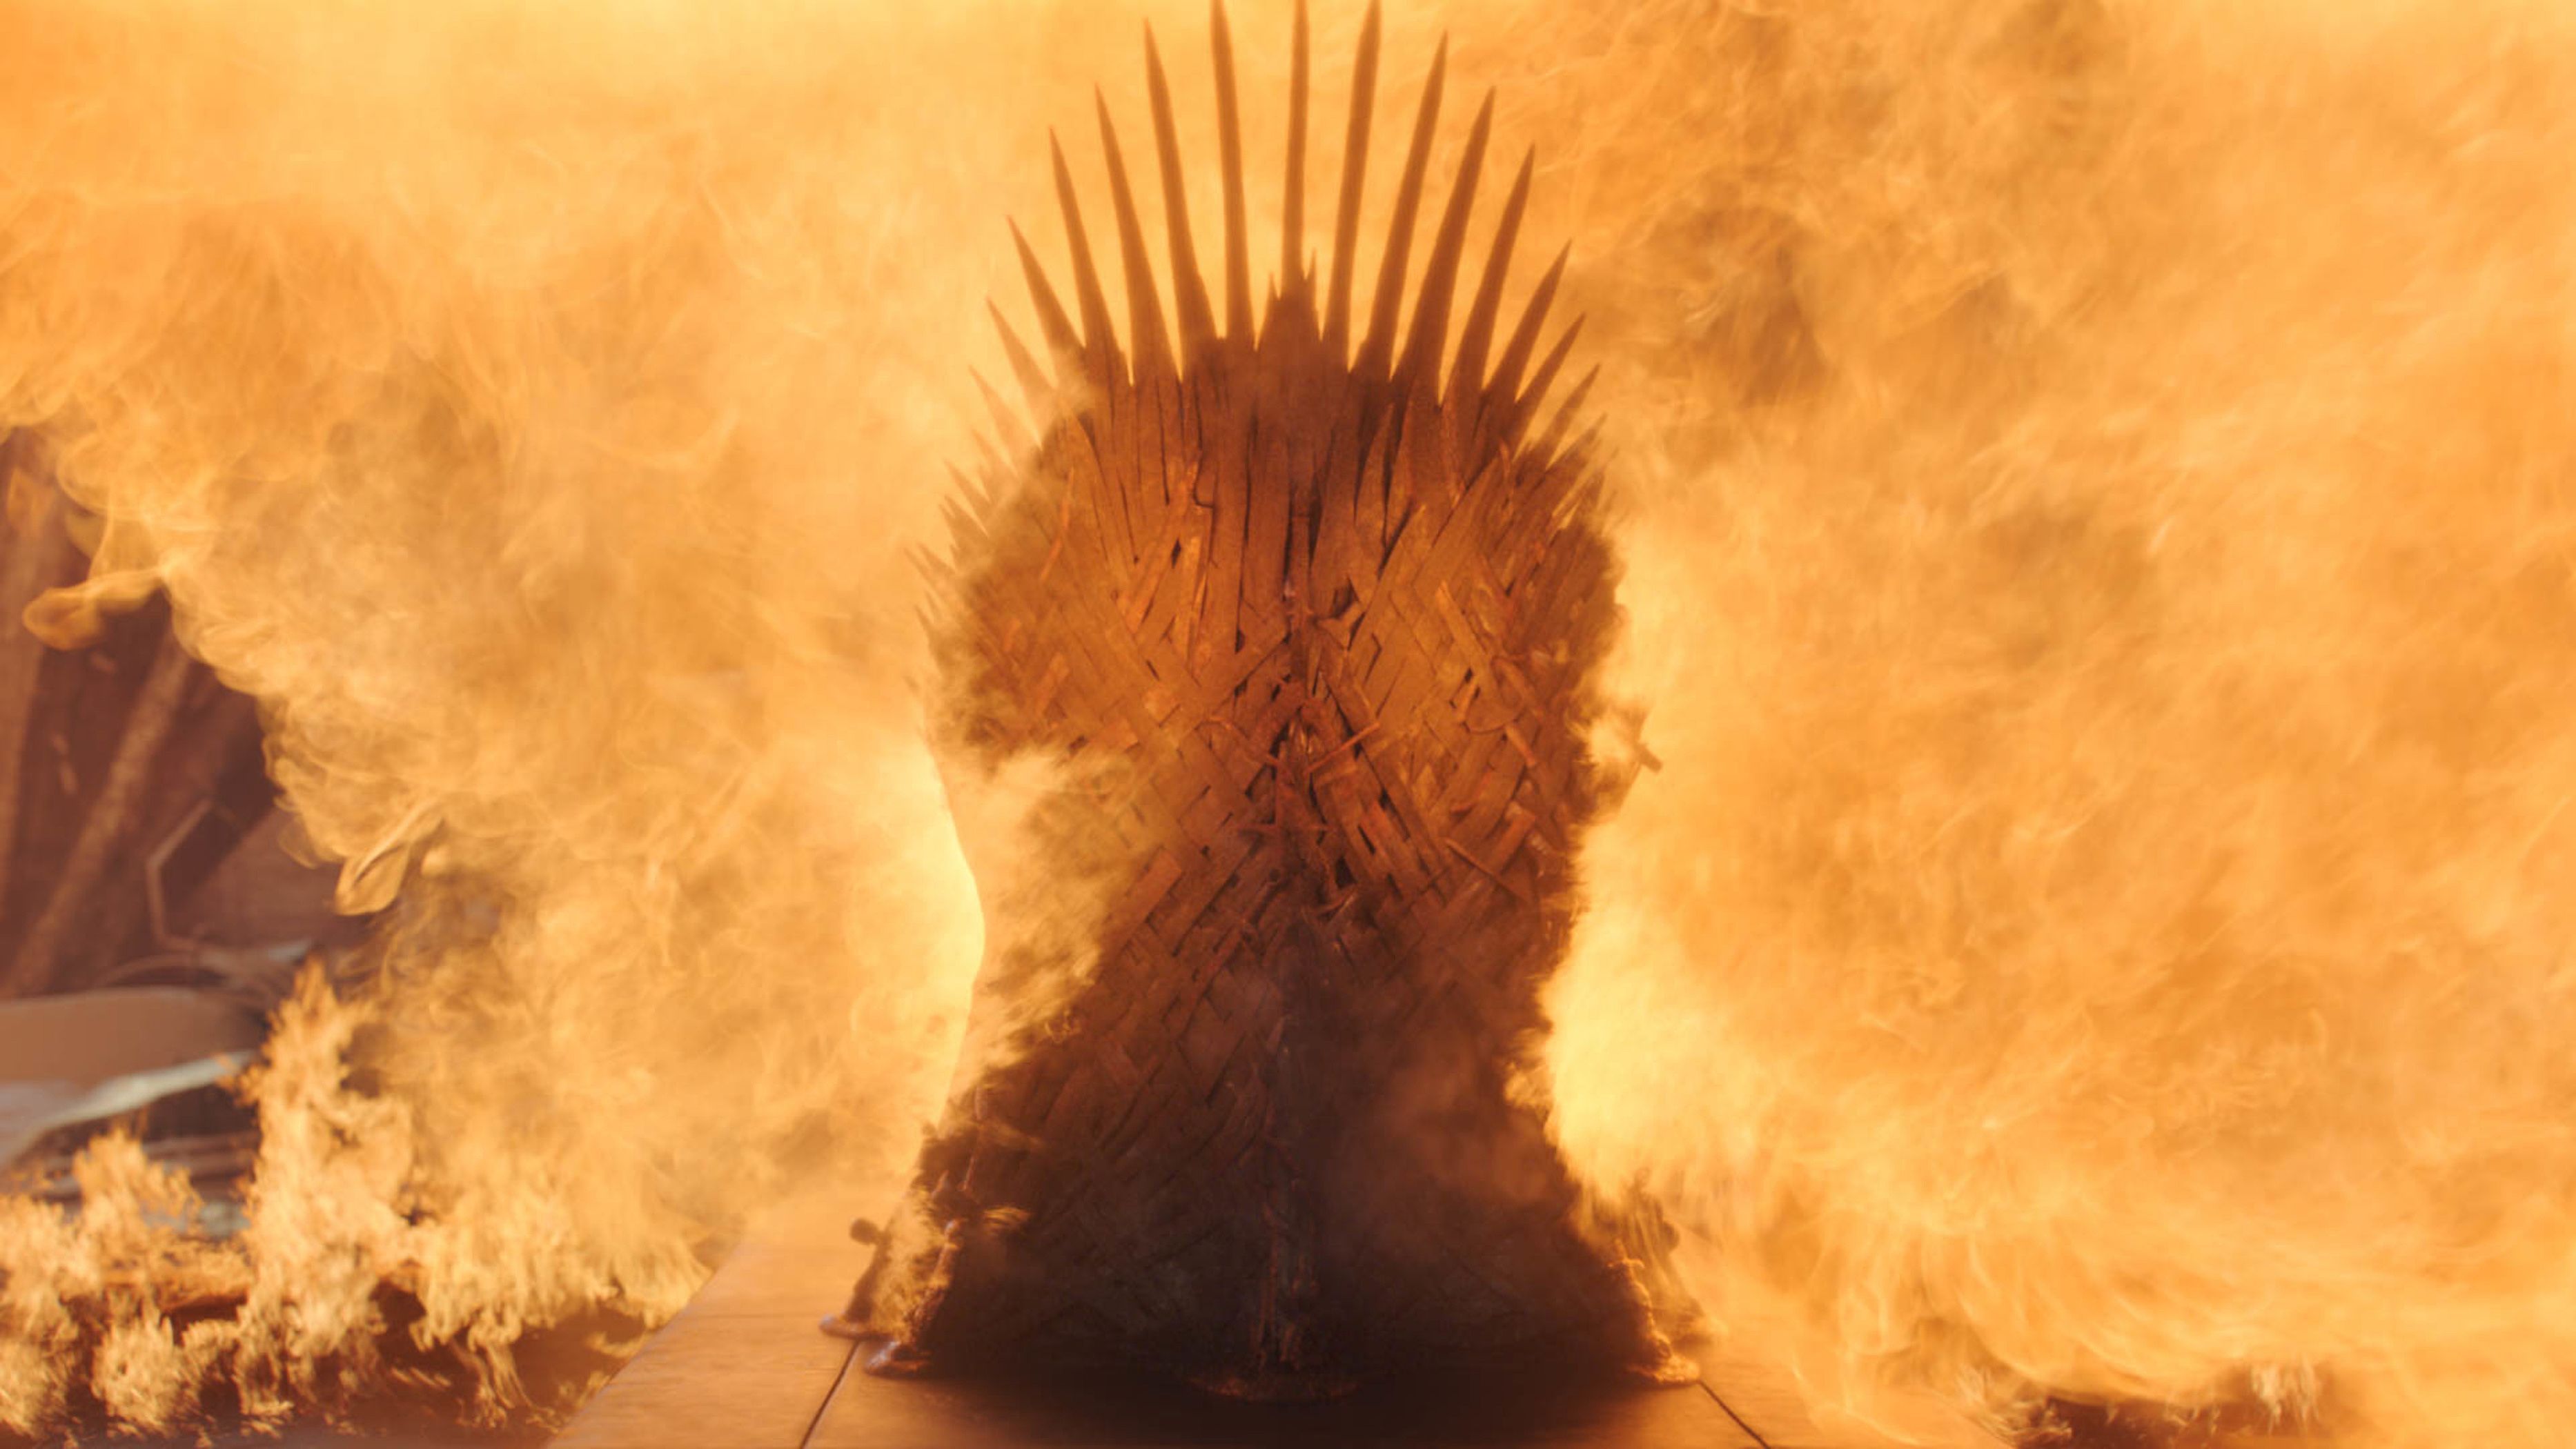 Which Game Of Thrones Character Are You? Melted Iron Throne